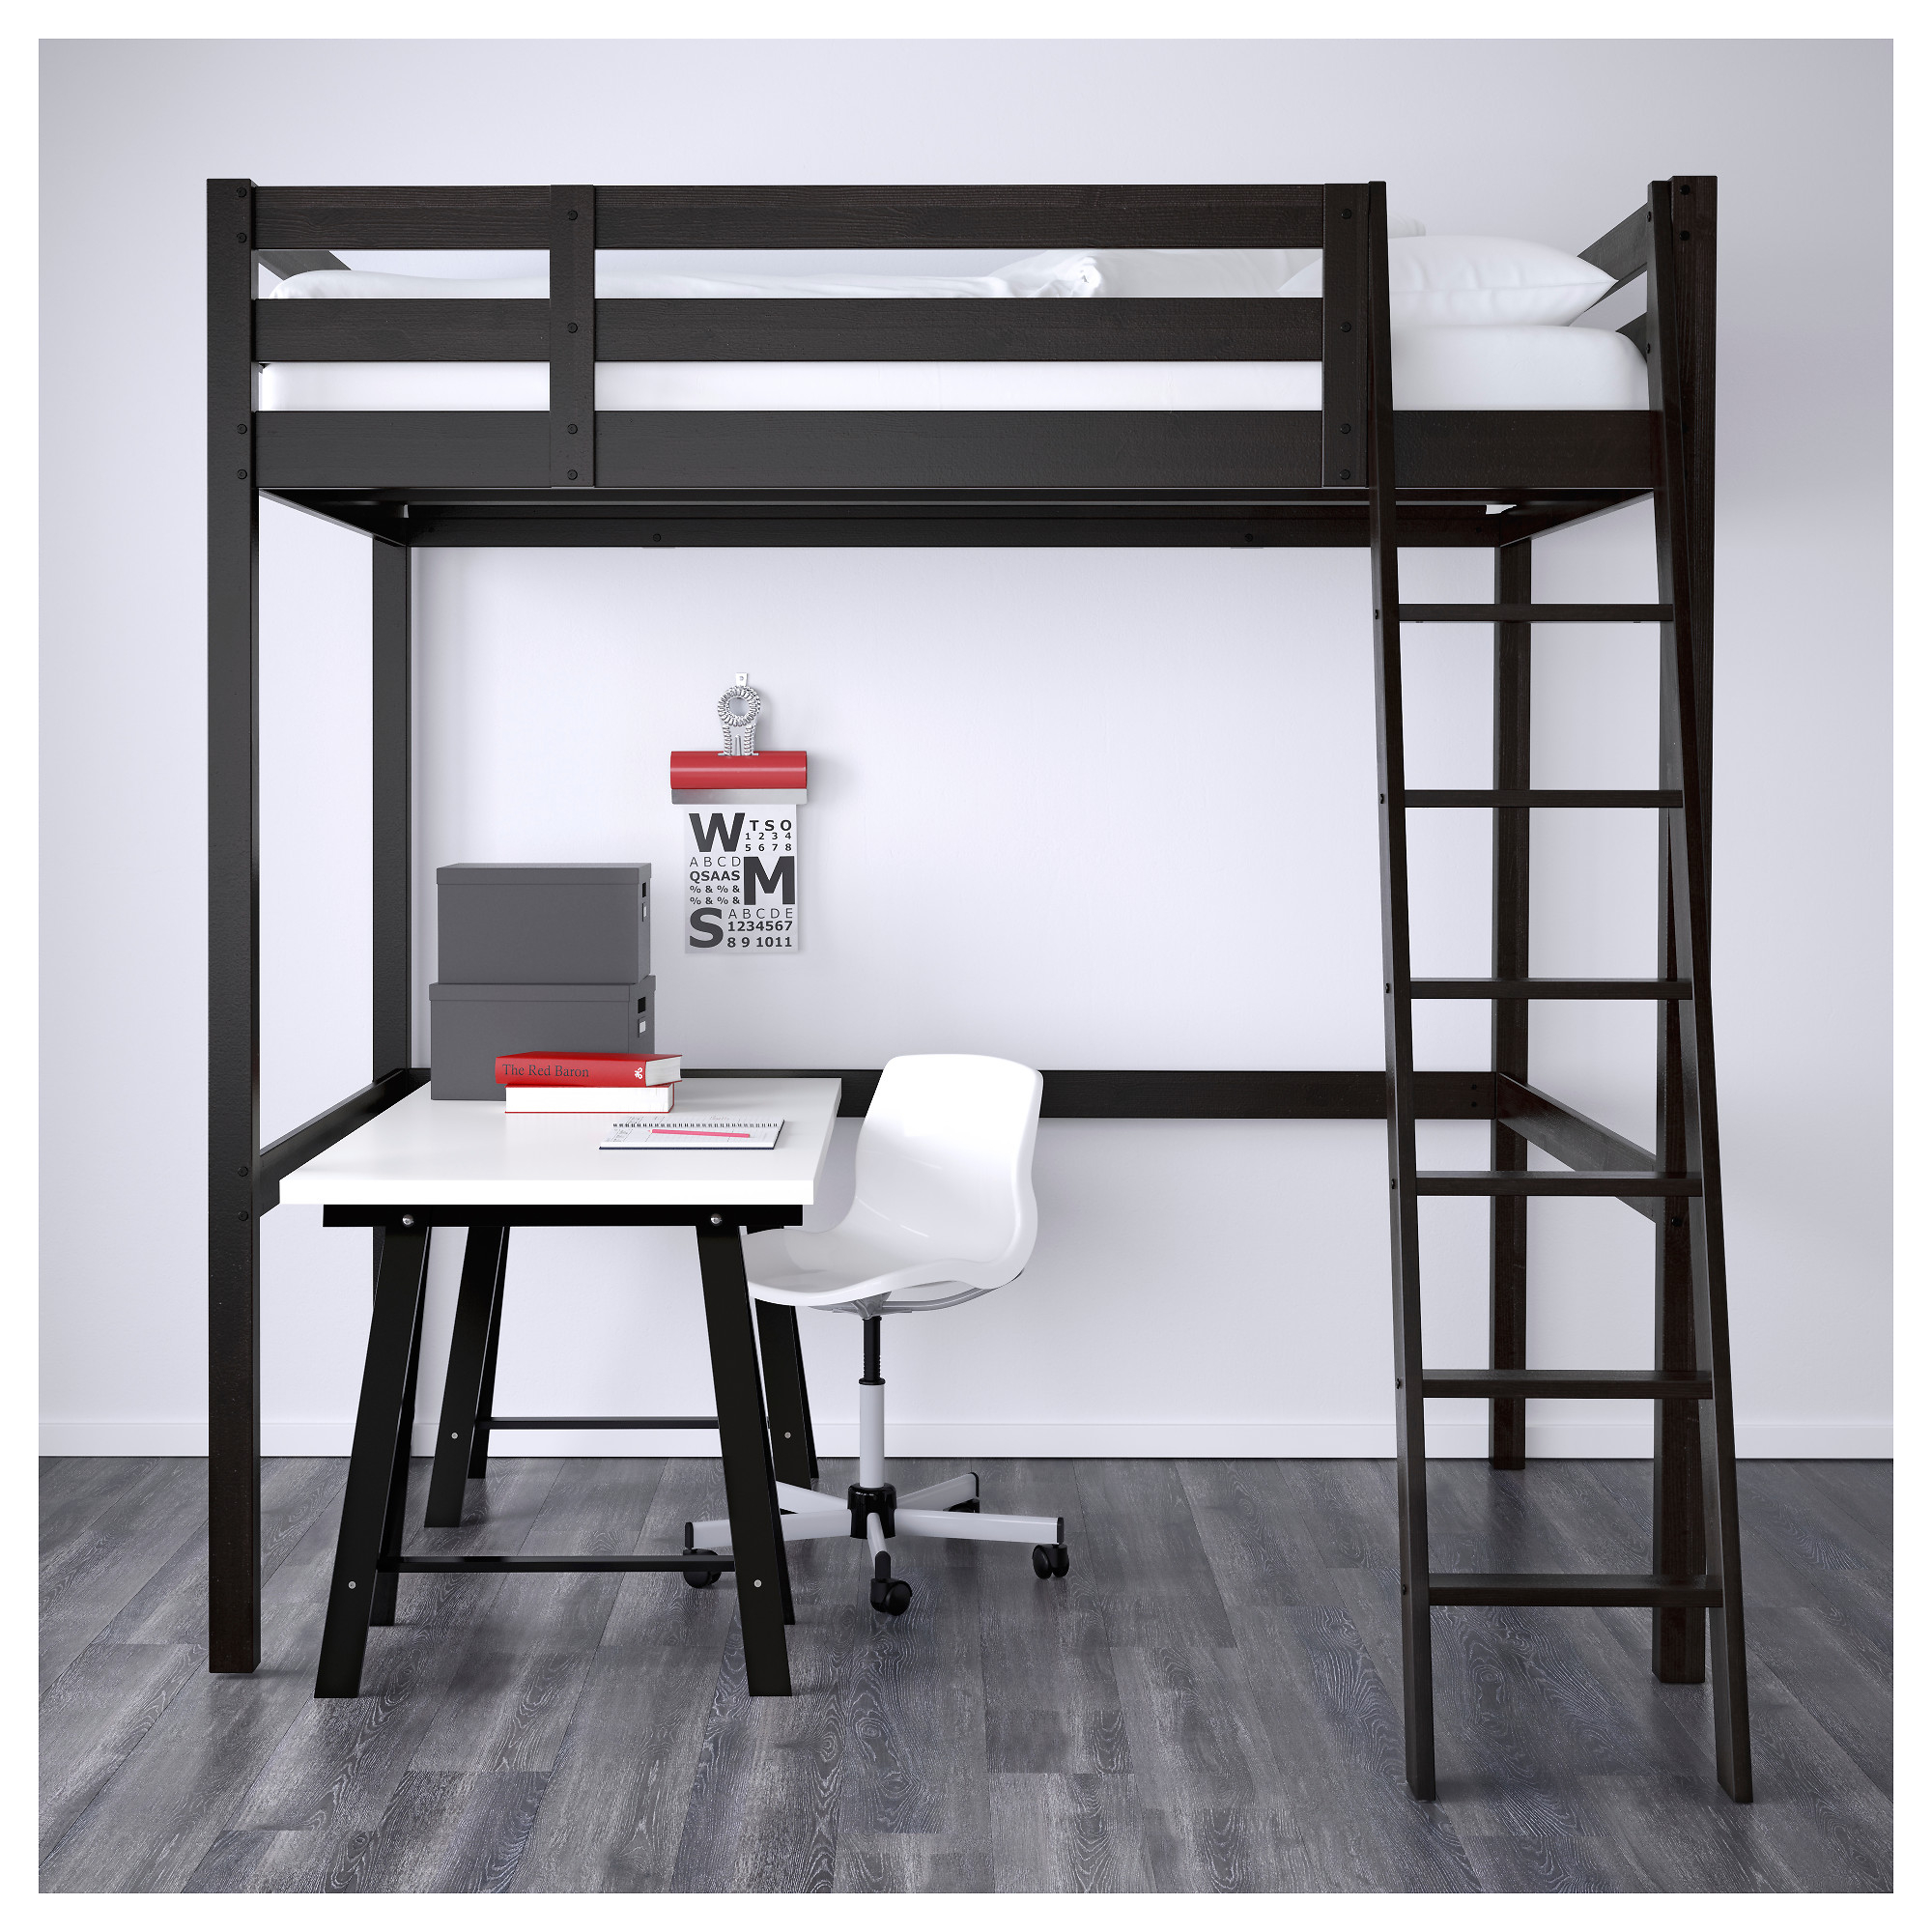 Ikea Loft Beds To Or Not In, Ikea Loft Bed Weight Limit